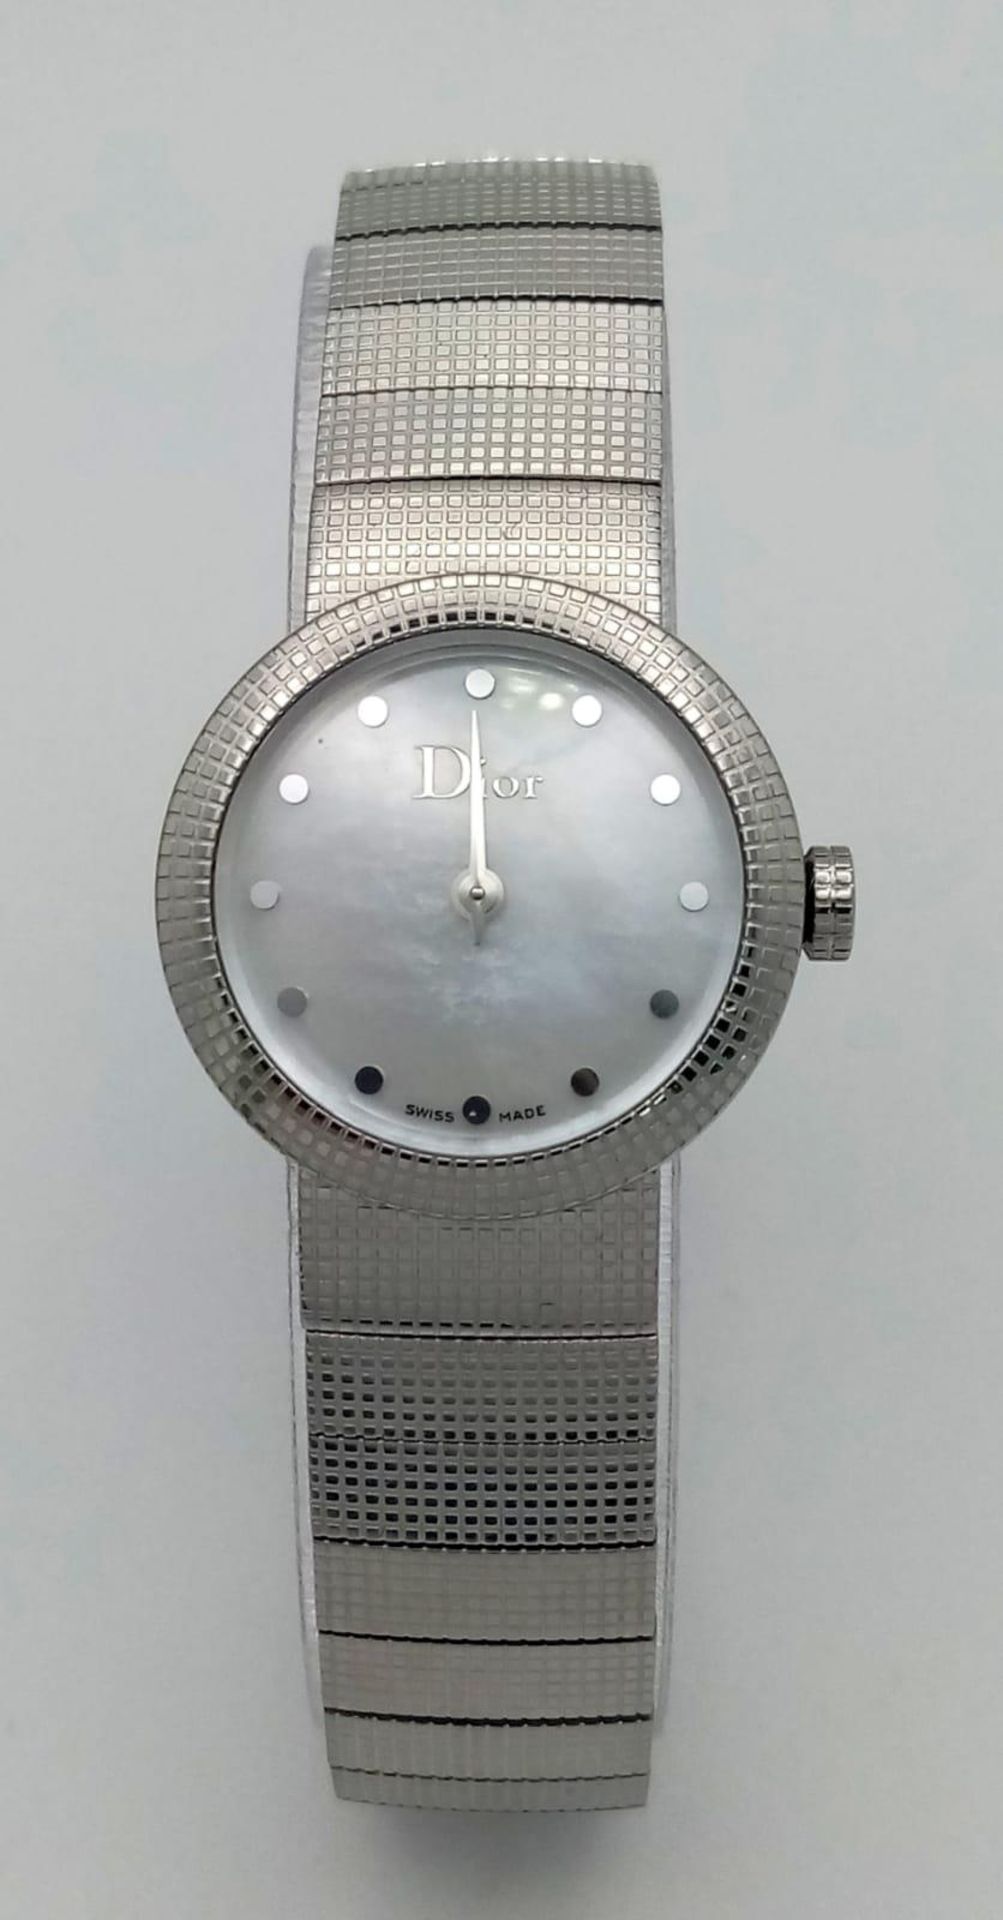 A Designer Christian Dior Quartz Ladies Watch. Stainless steel bracelet and case - 23mm. White dial. - Image 5 of 10